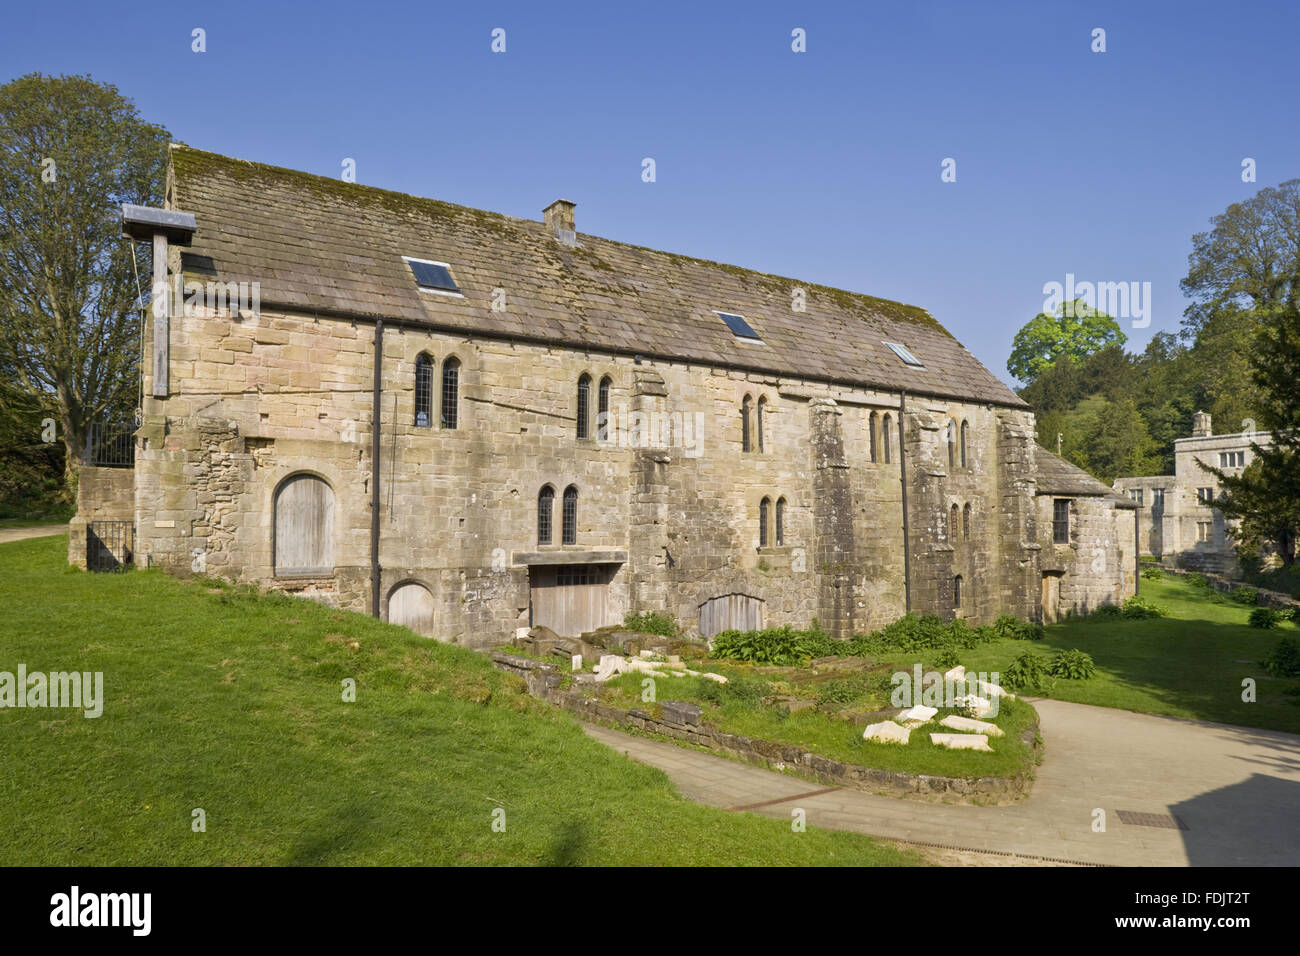 Fountains Mill, the oldest building on the Fountains Abbey estate in North Yorkshire. The twelfth century cornmill was part of the community created by Cistercian monks until the dissolution in 1539. Stock Photo